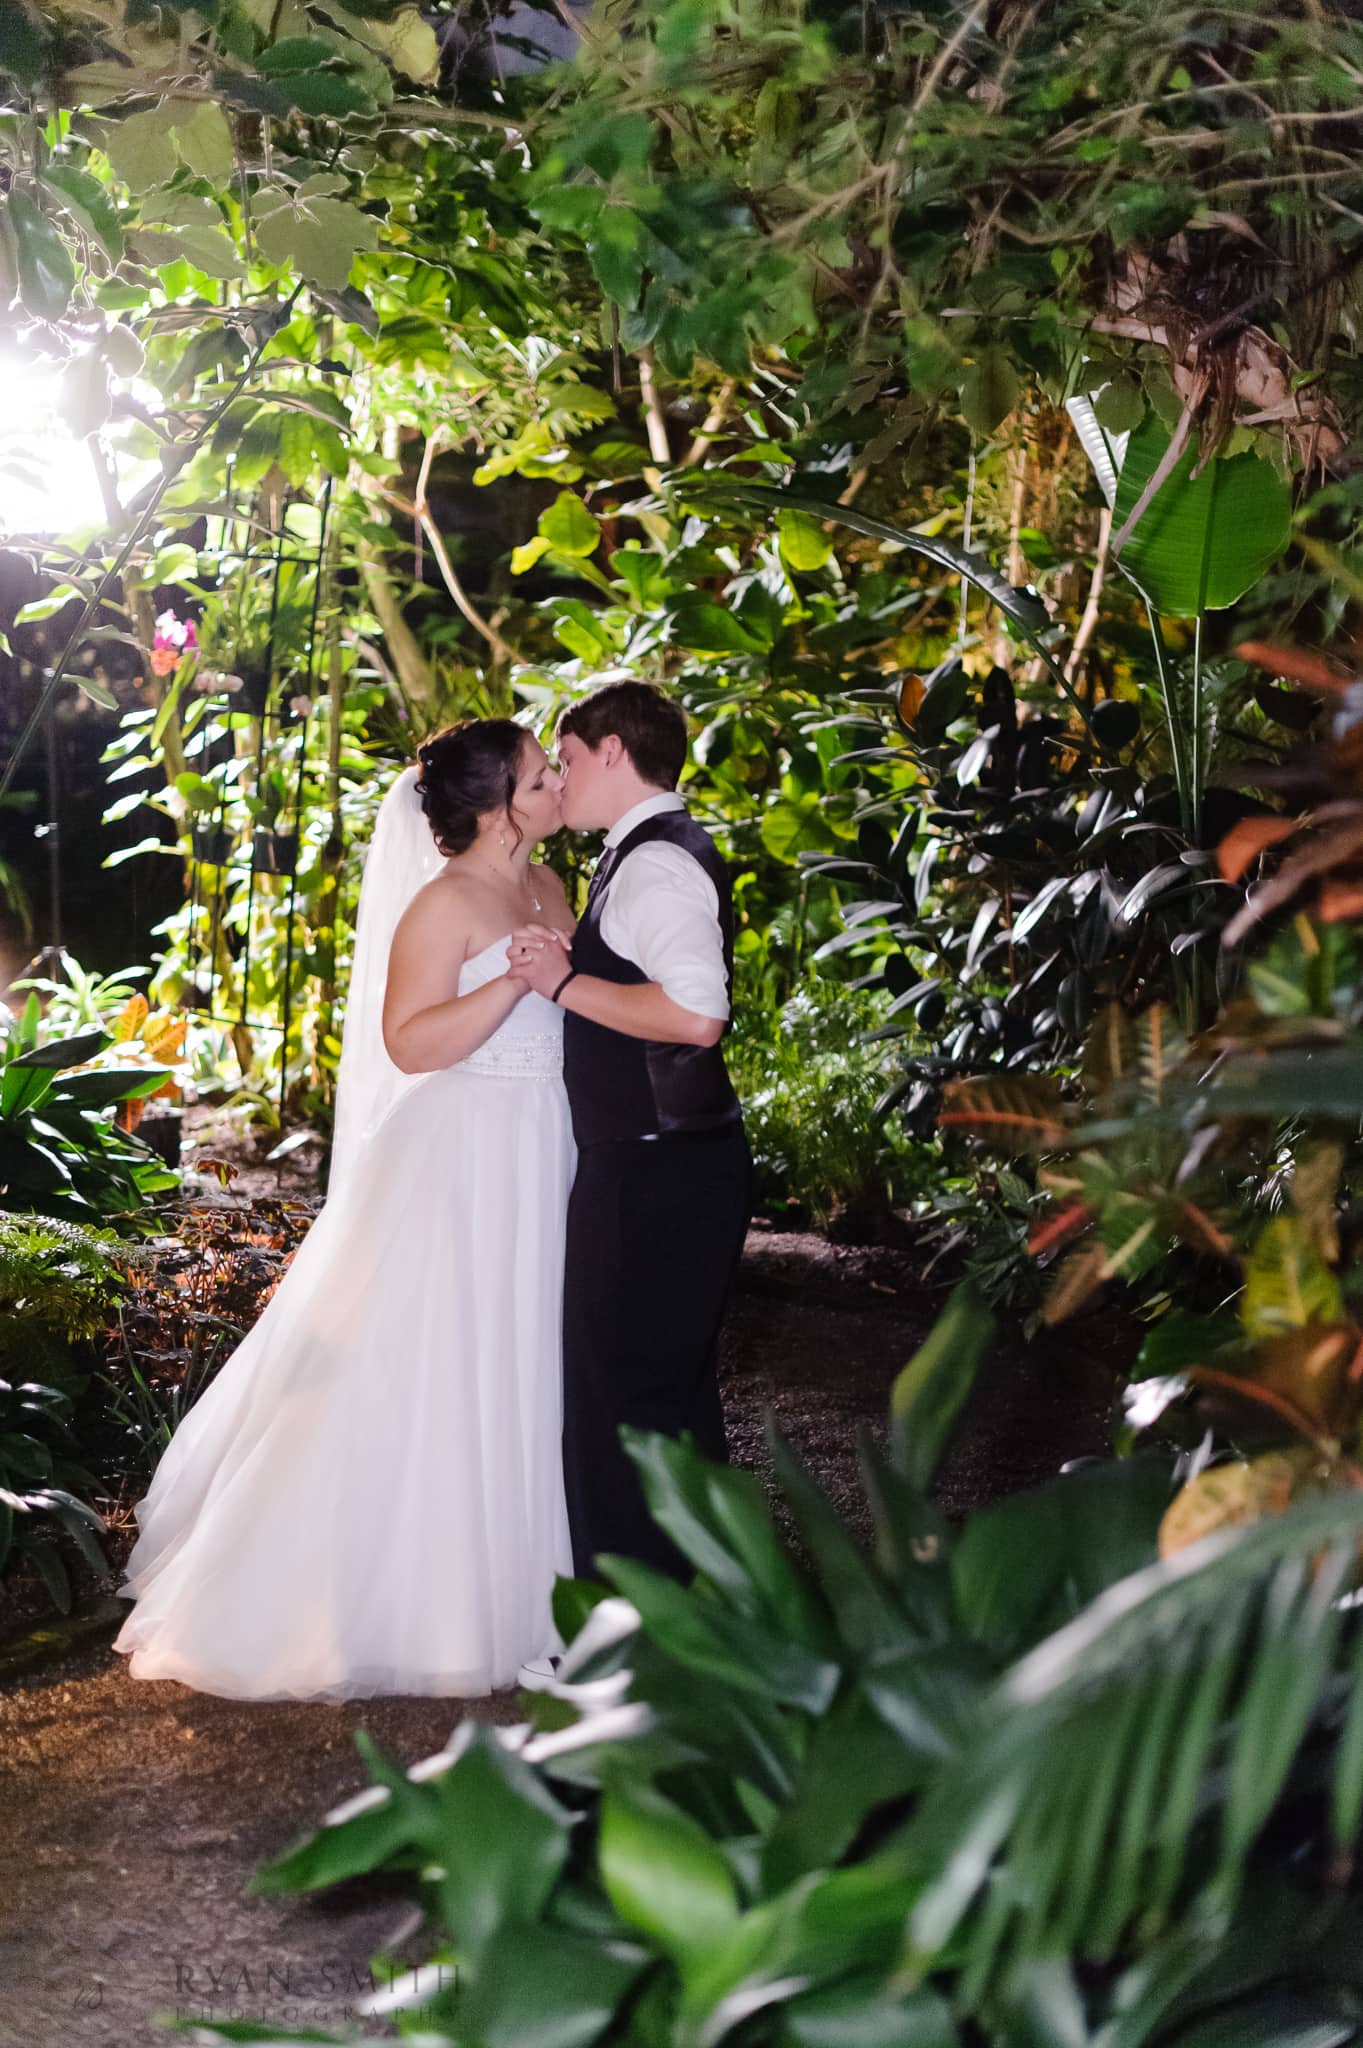 Kiss in the conservatory - Magnolia Plantation